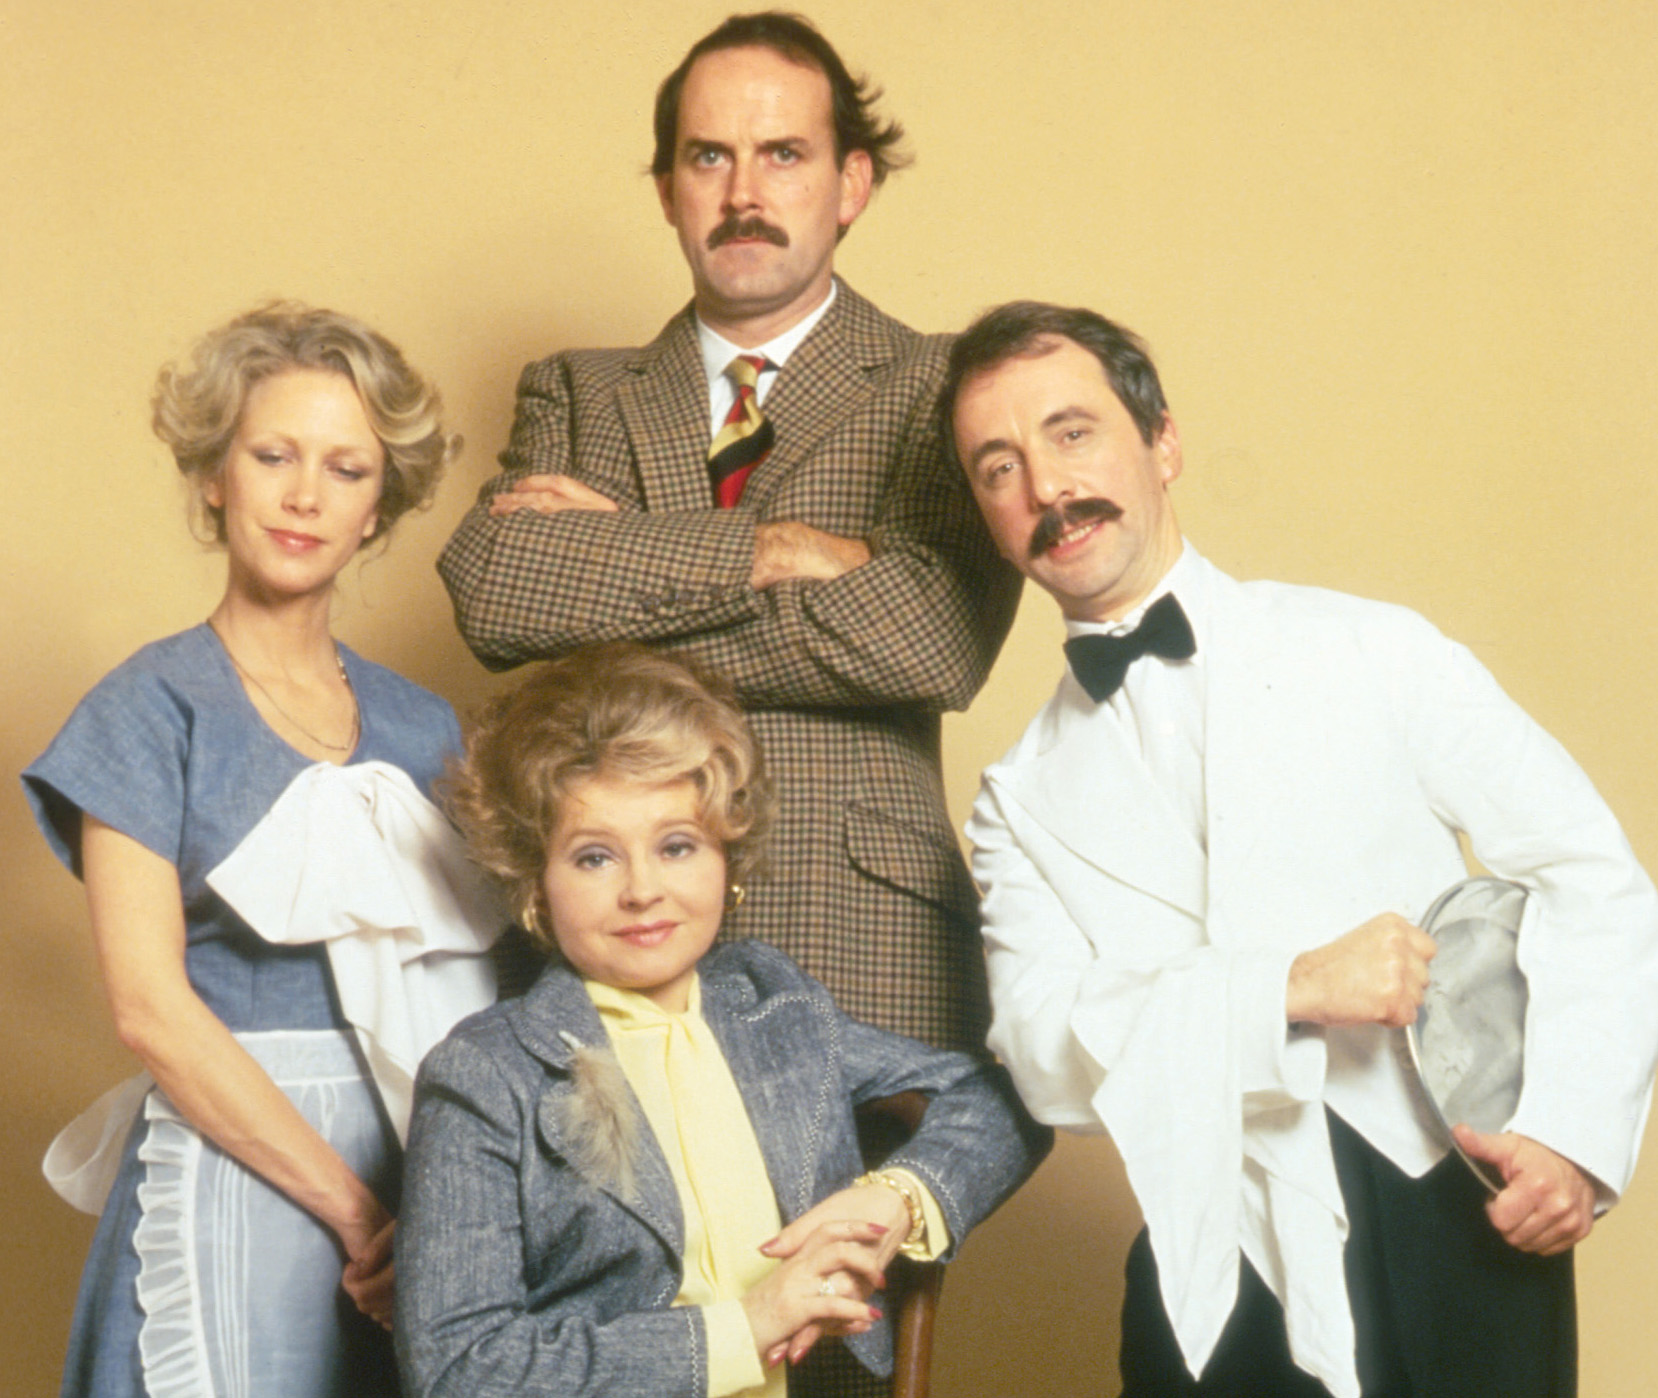 Fawlty Towers cast - Andrew Sachs in a white jacket.